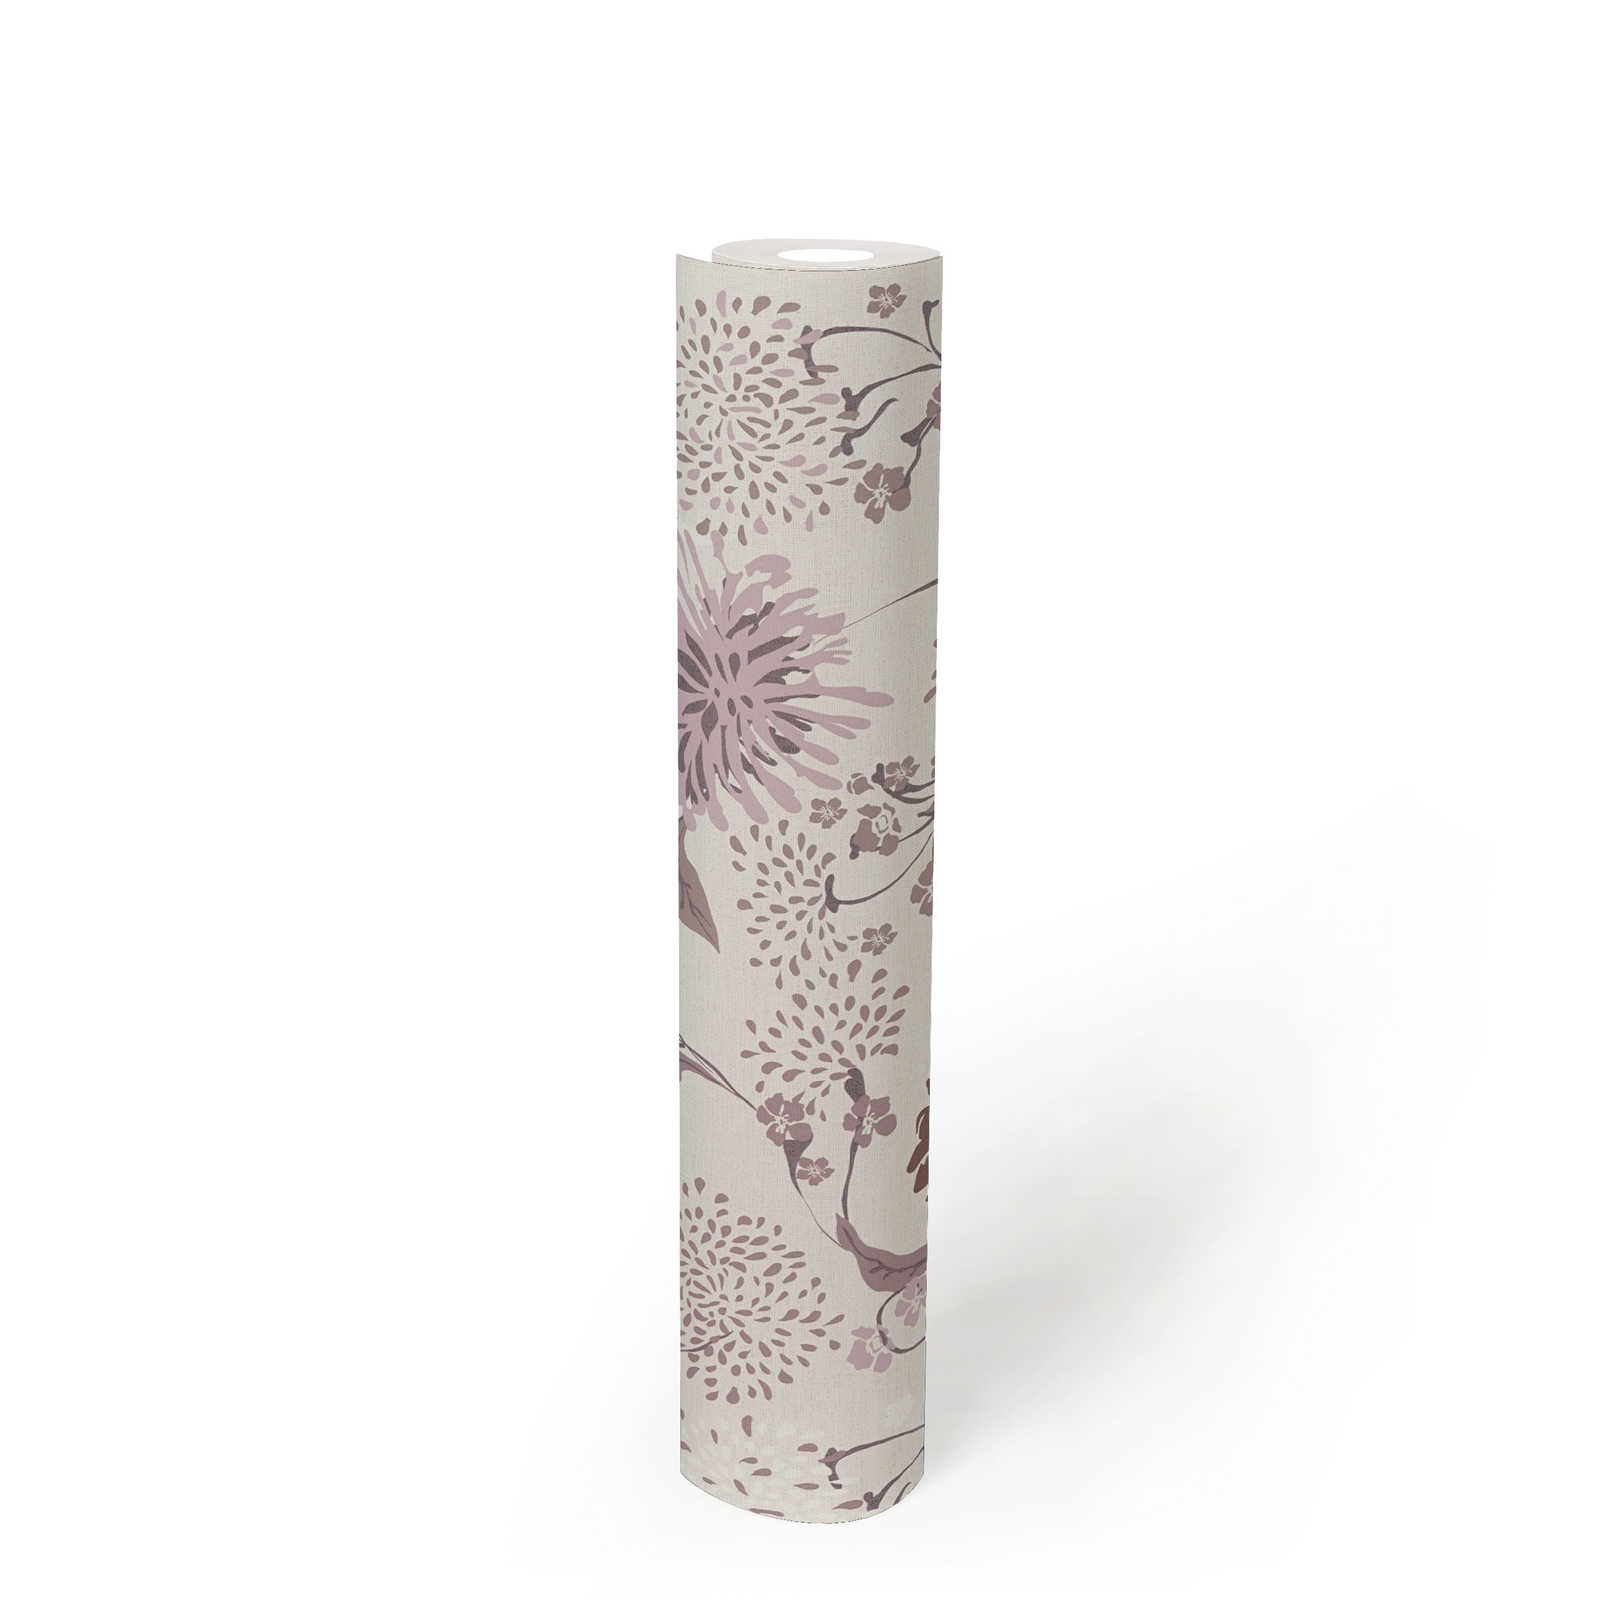             Floral non-woven wallpaper with dandelion pattern - cream, pink
        